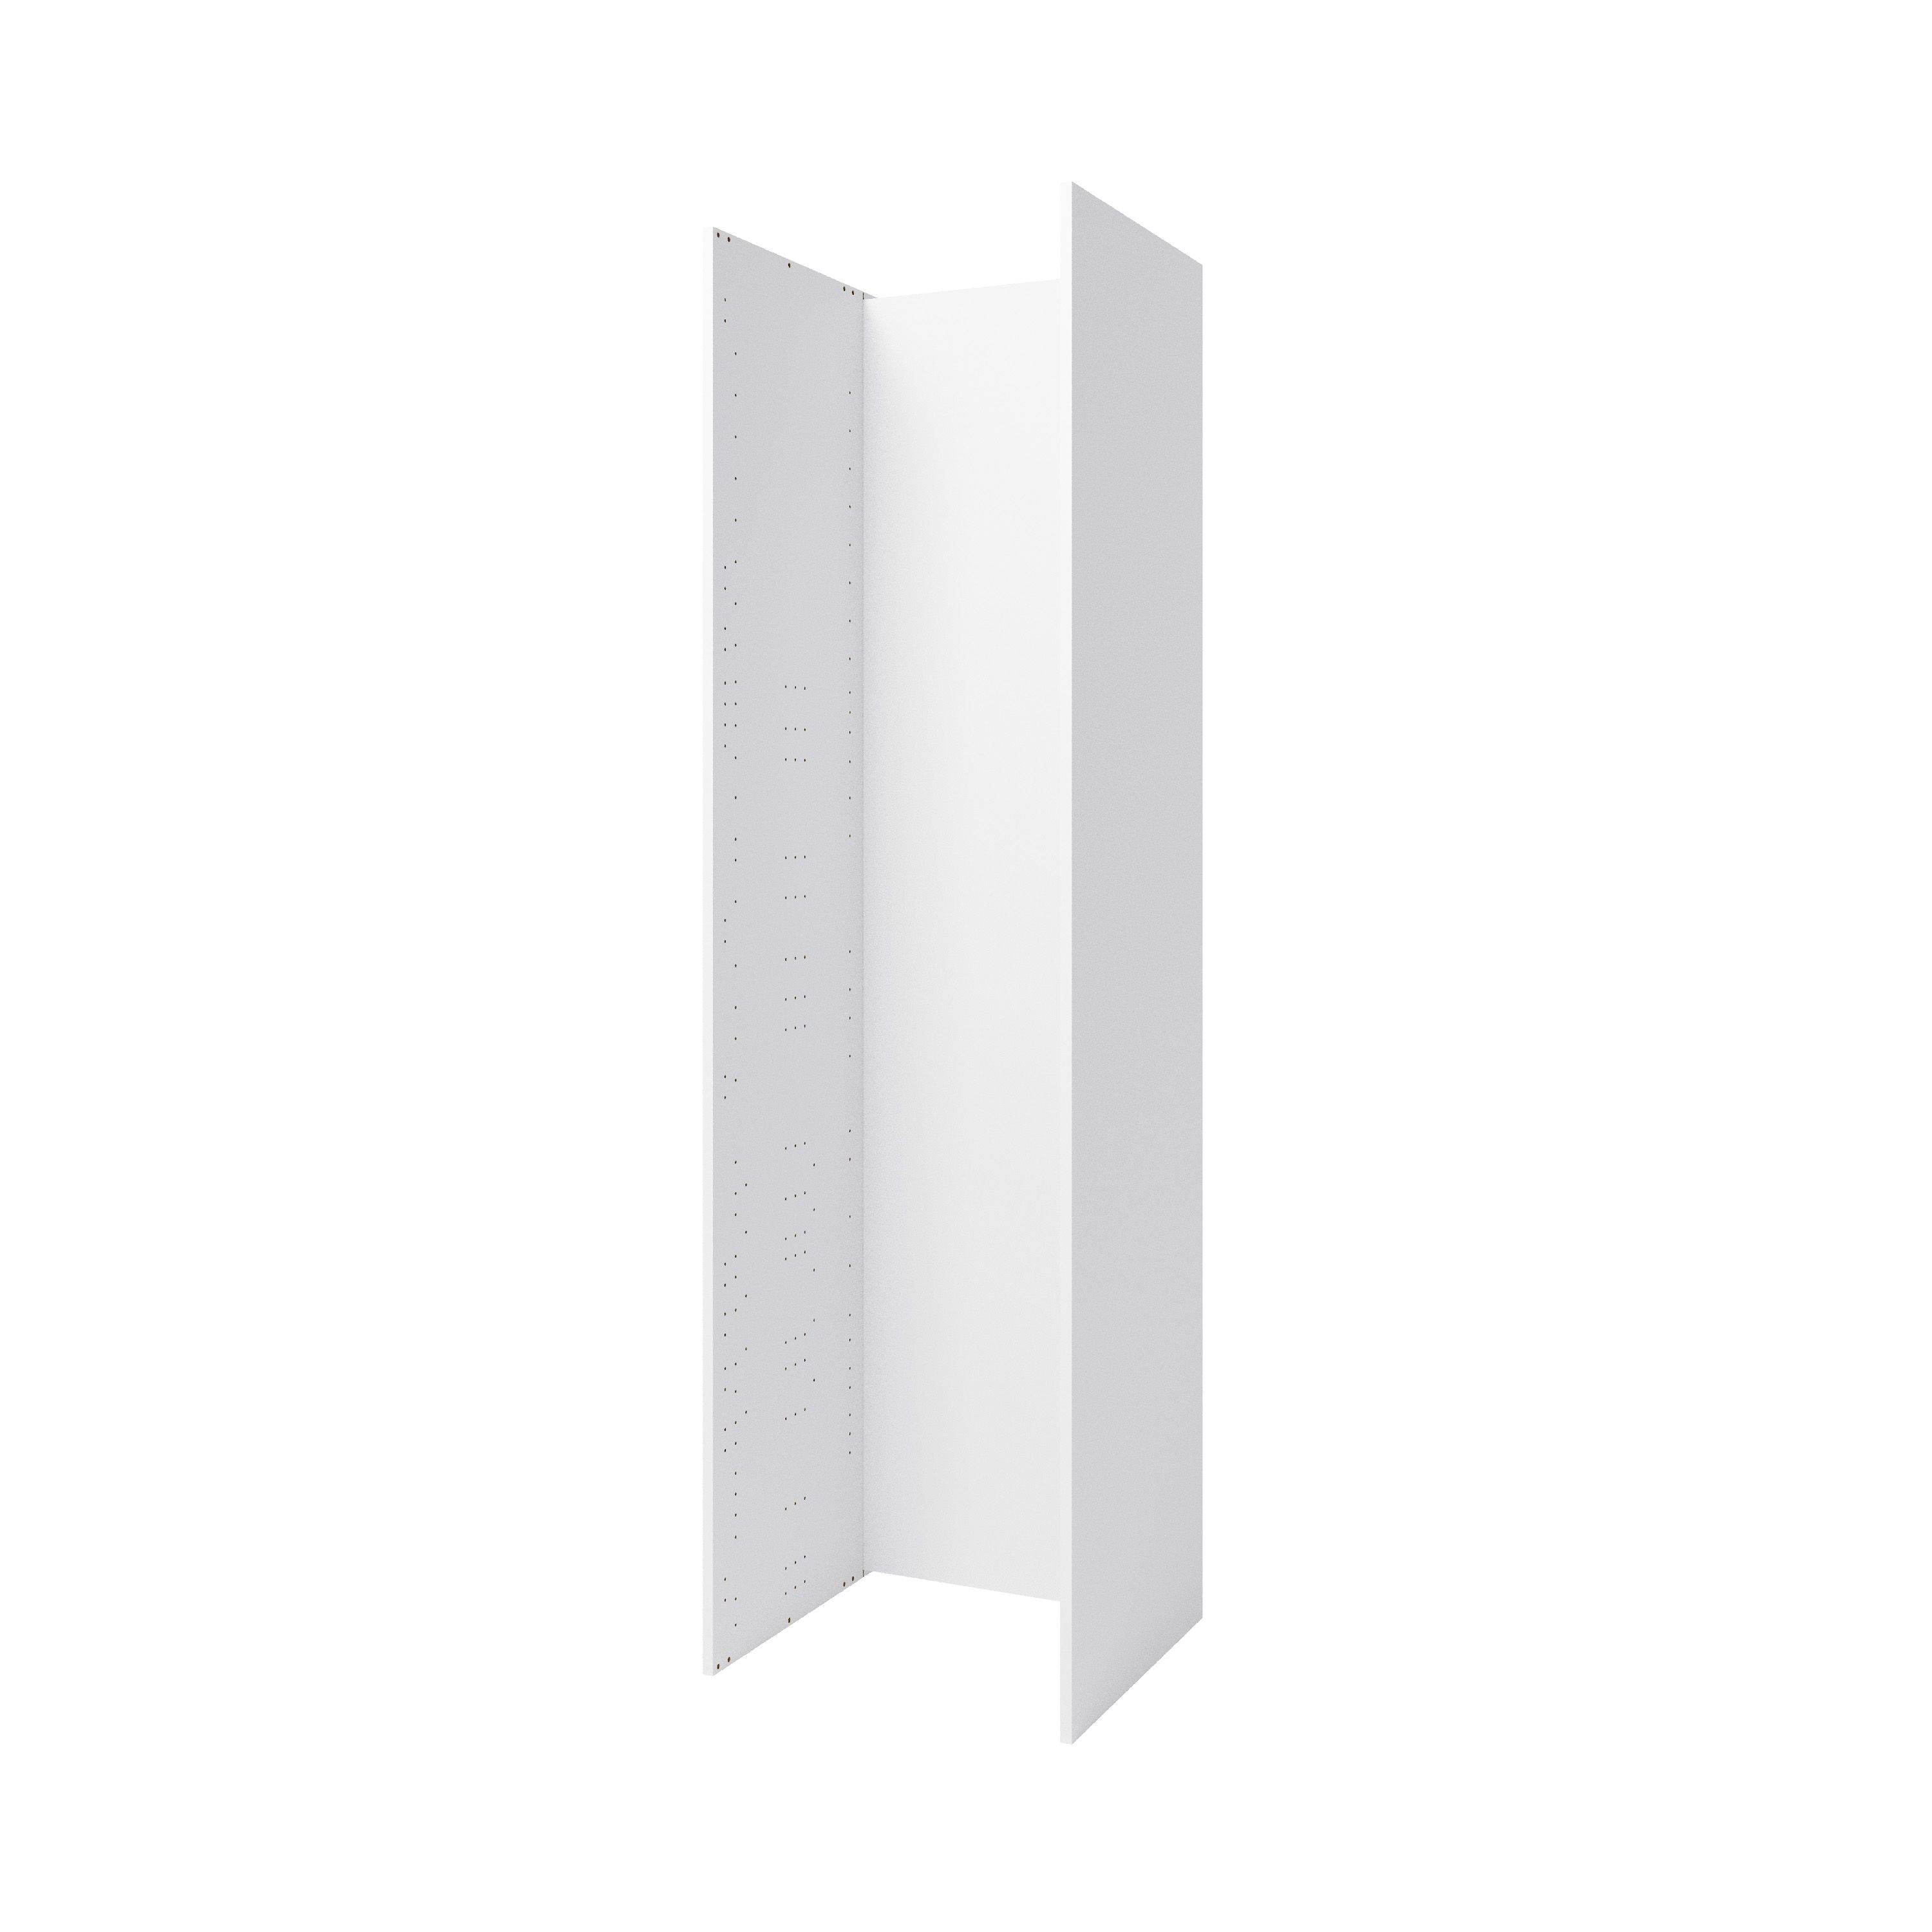 GoodHome Caraway Tall End panel (H)2190mm (W)600mm, Pack of 2